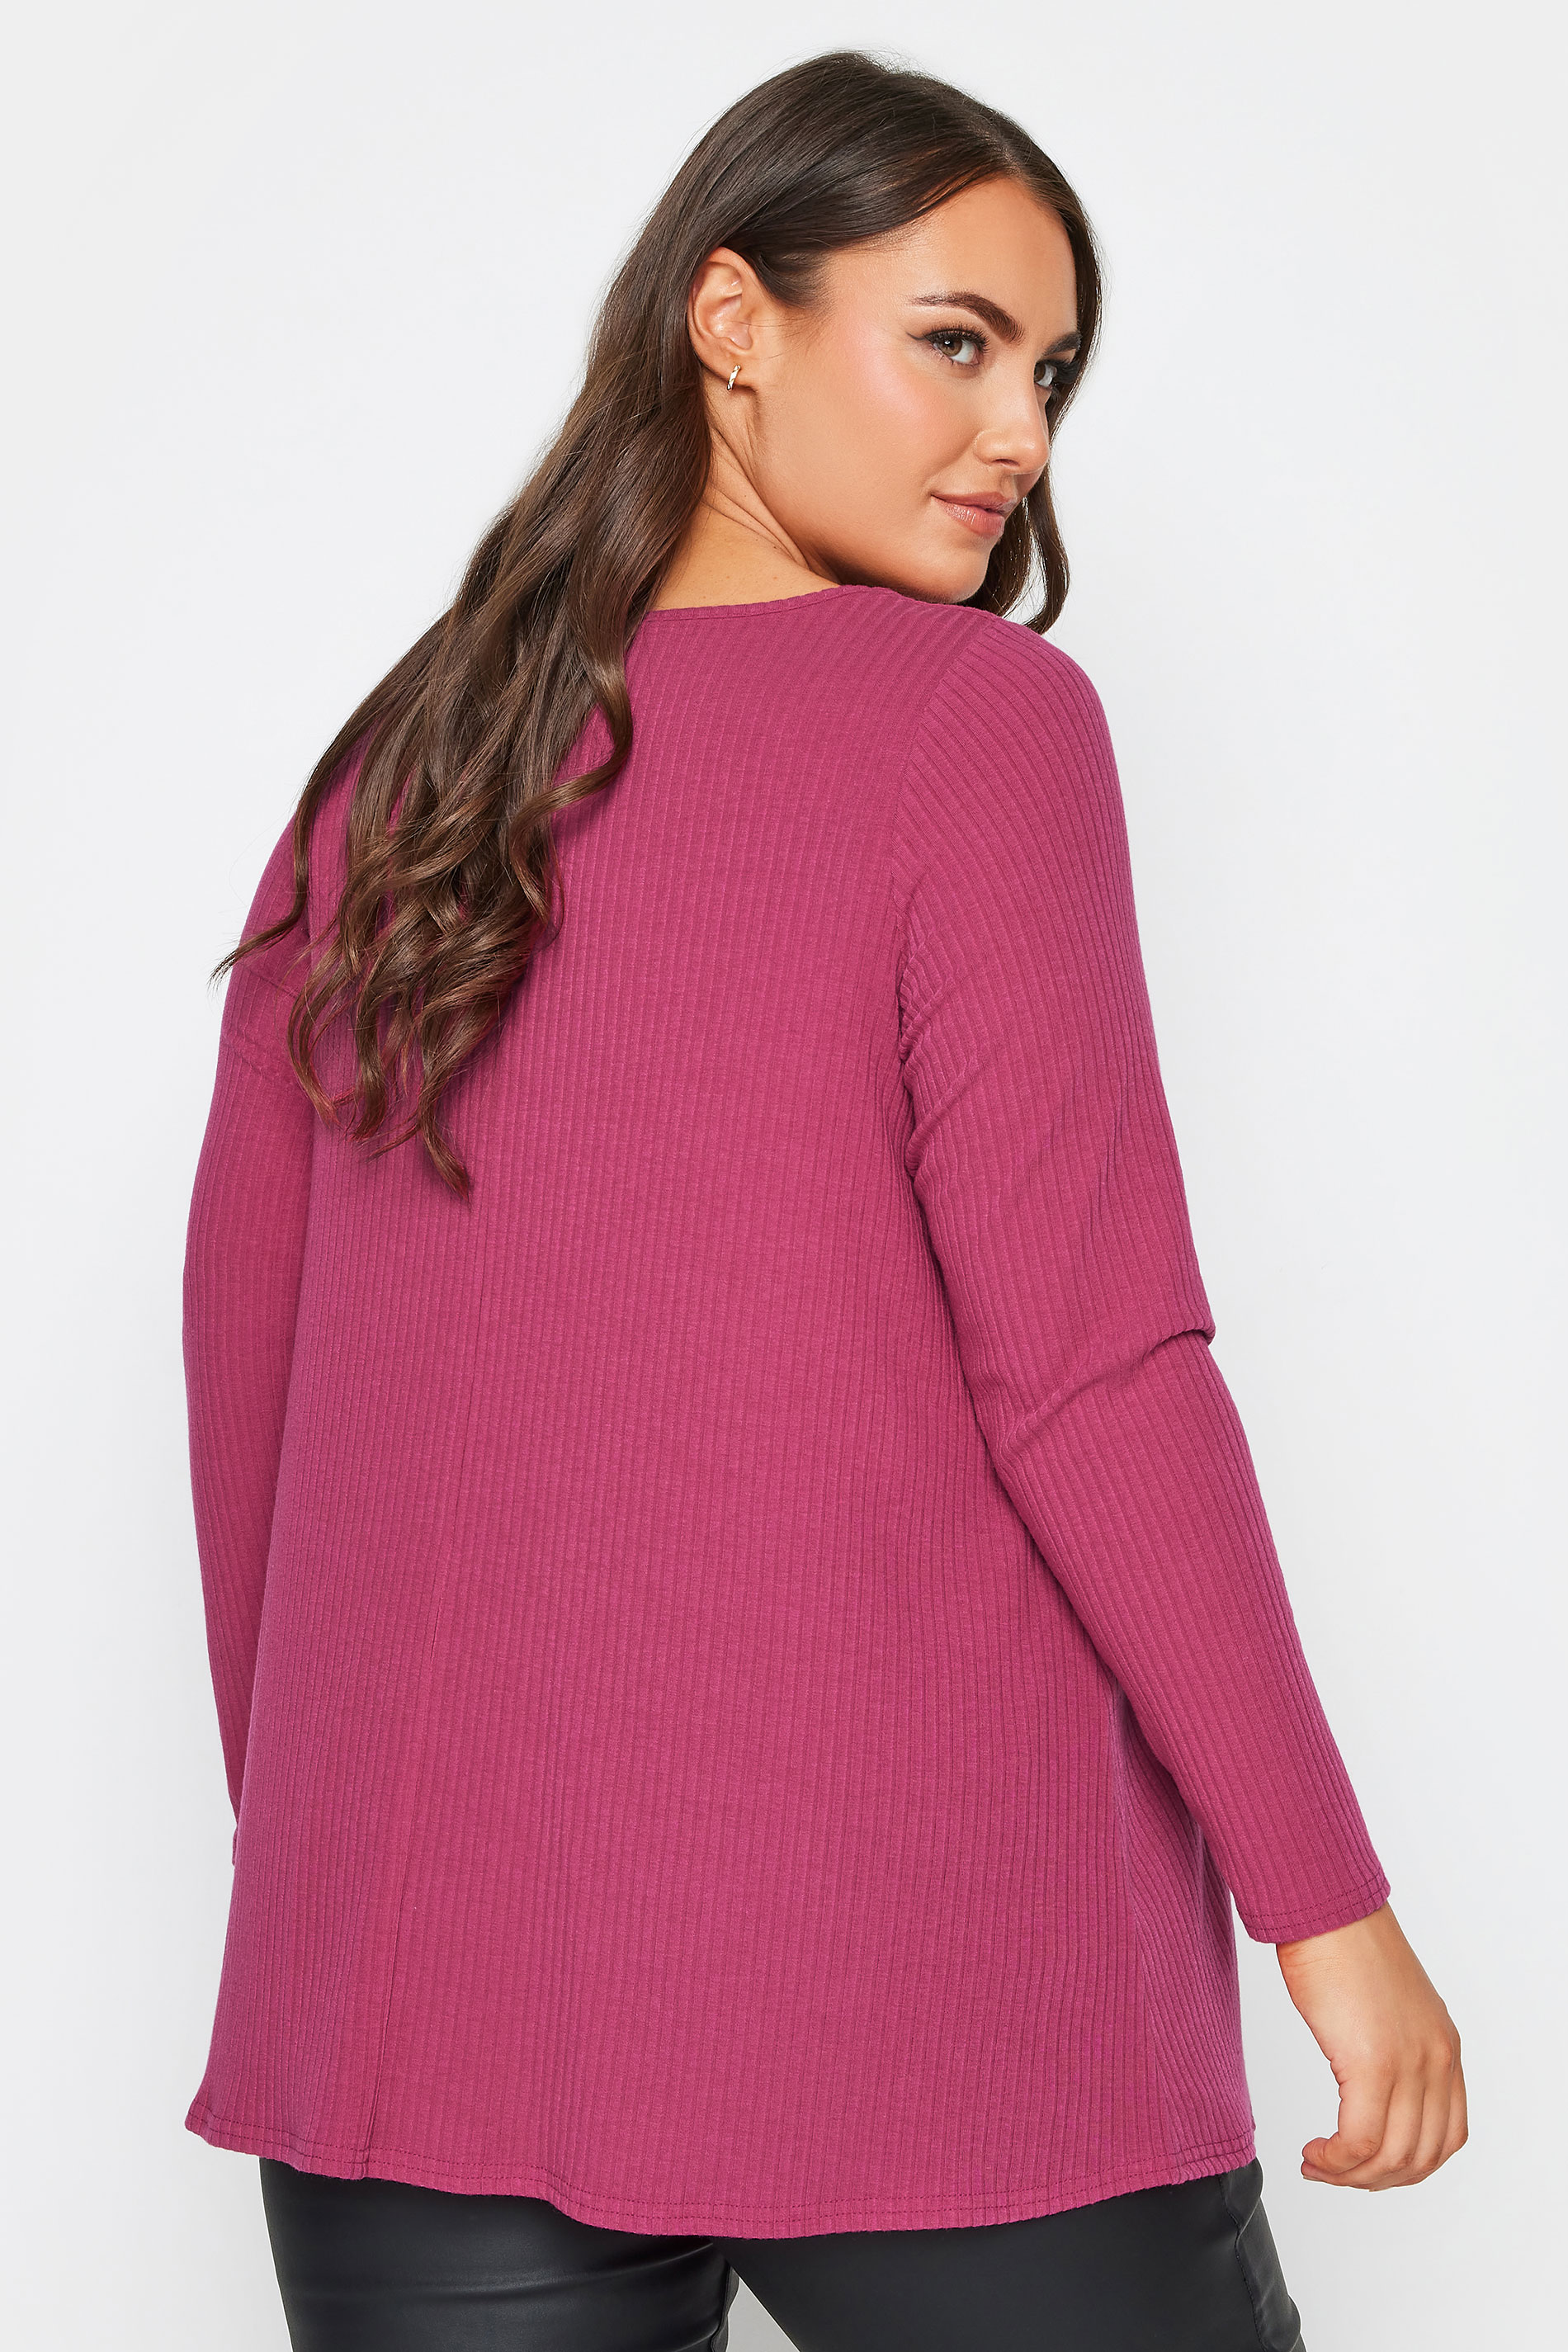 YOURS Plus Size Pink Twisted Front Ribbed Top | Yours Clothing 3